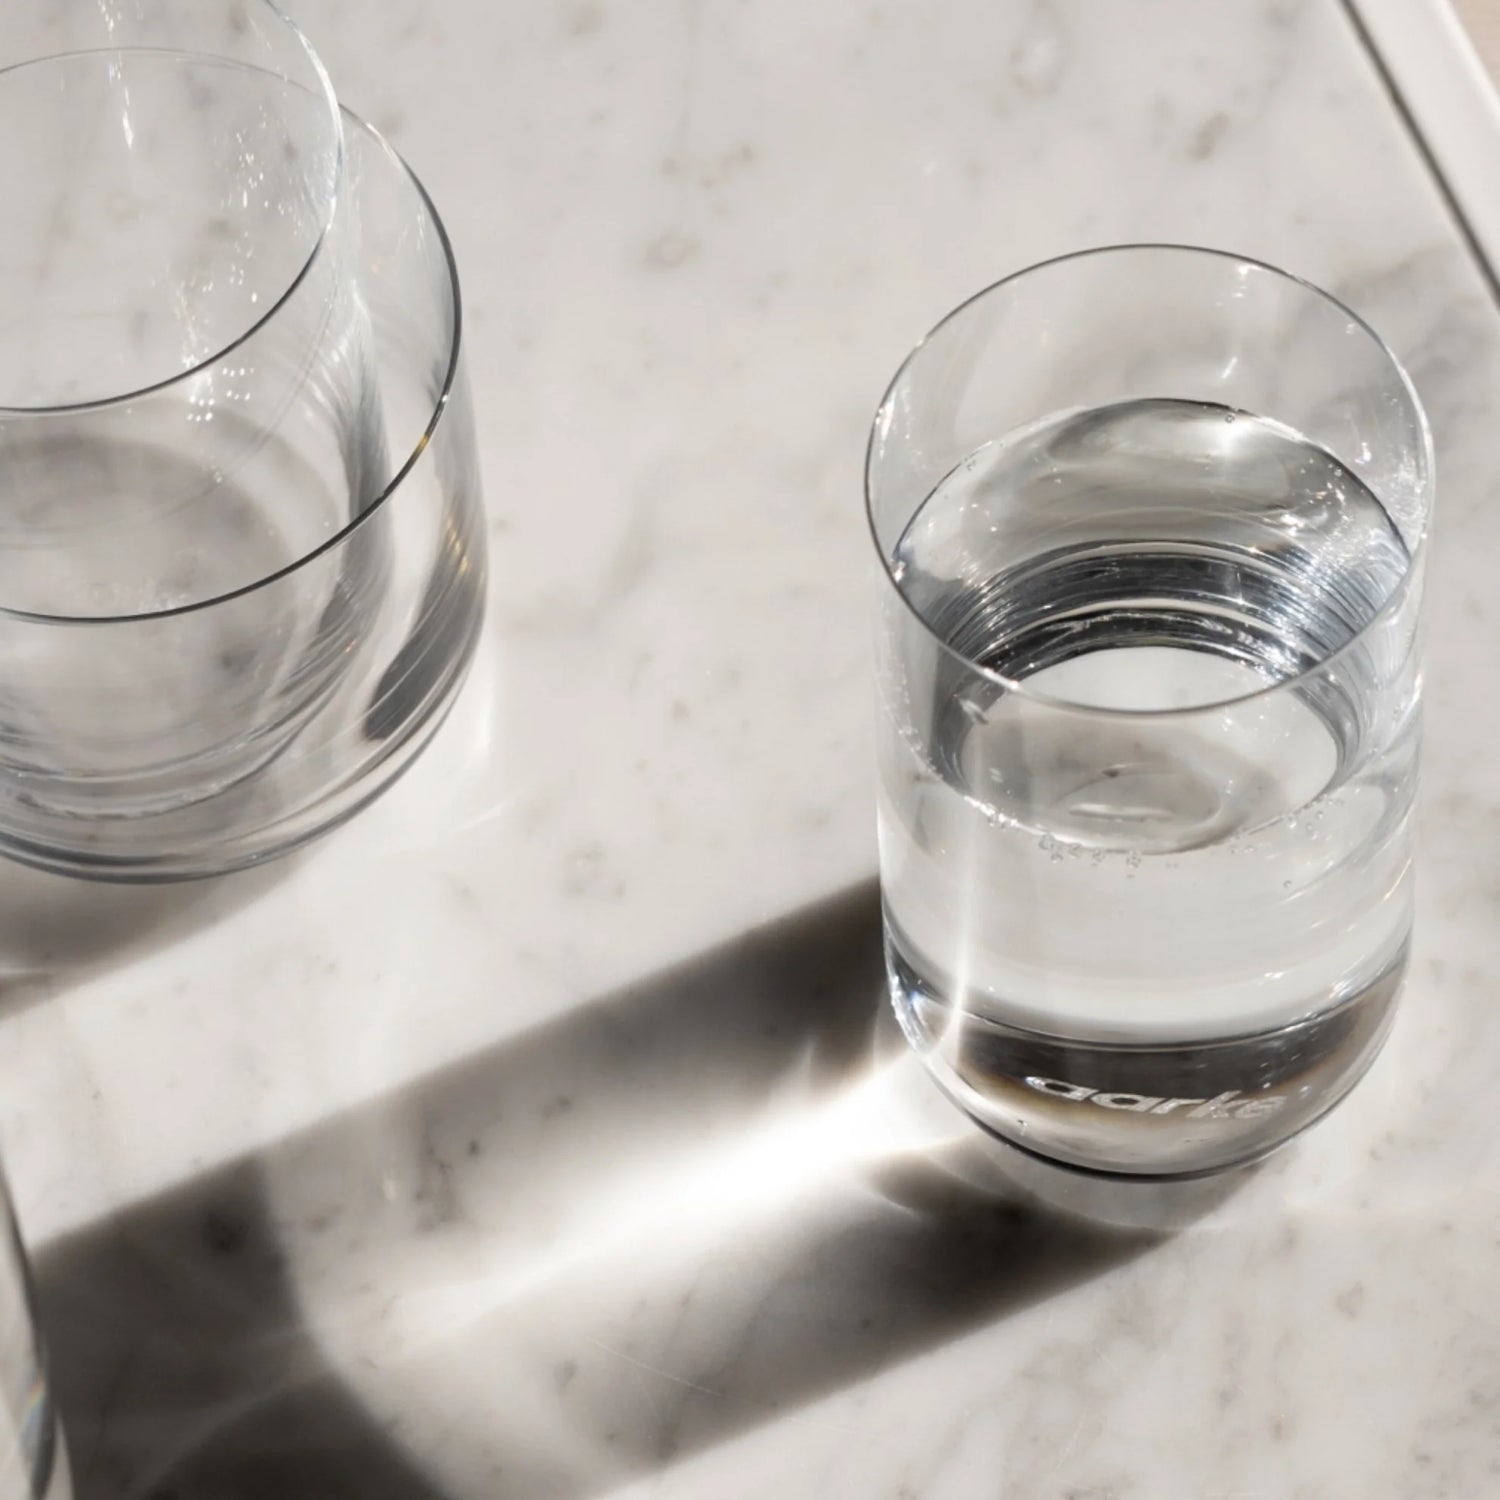 Aarke Glassware nesting glasses set on a table with water inside.